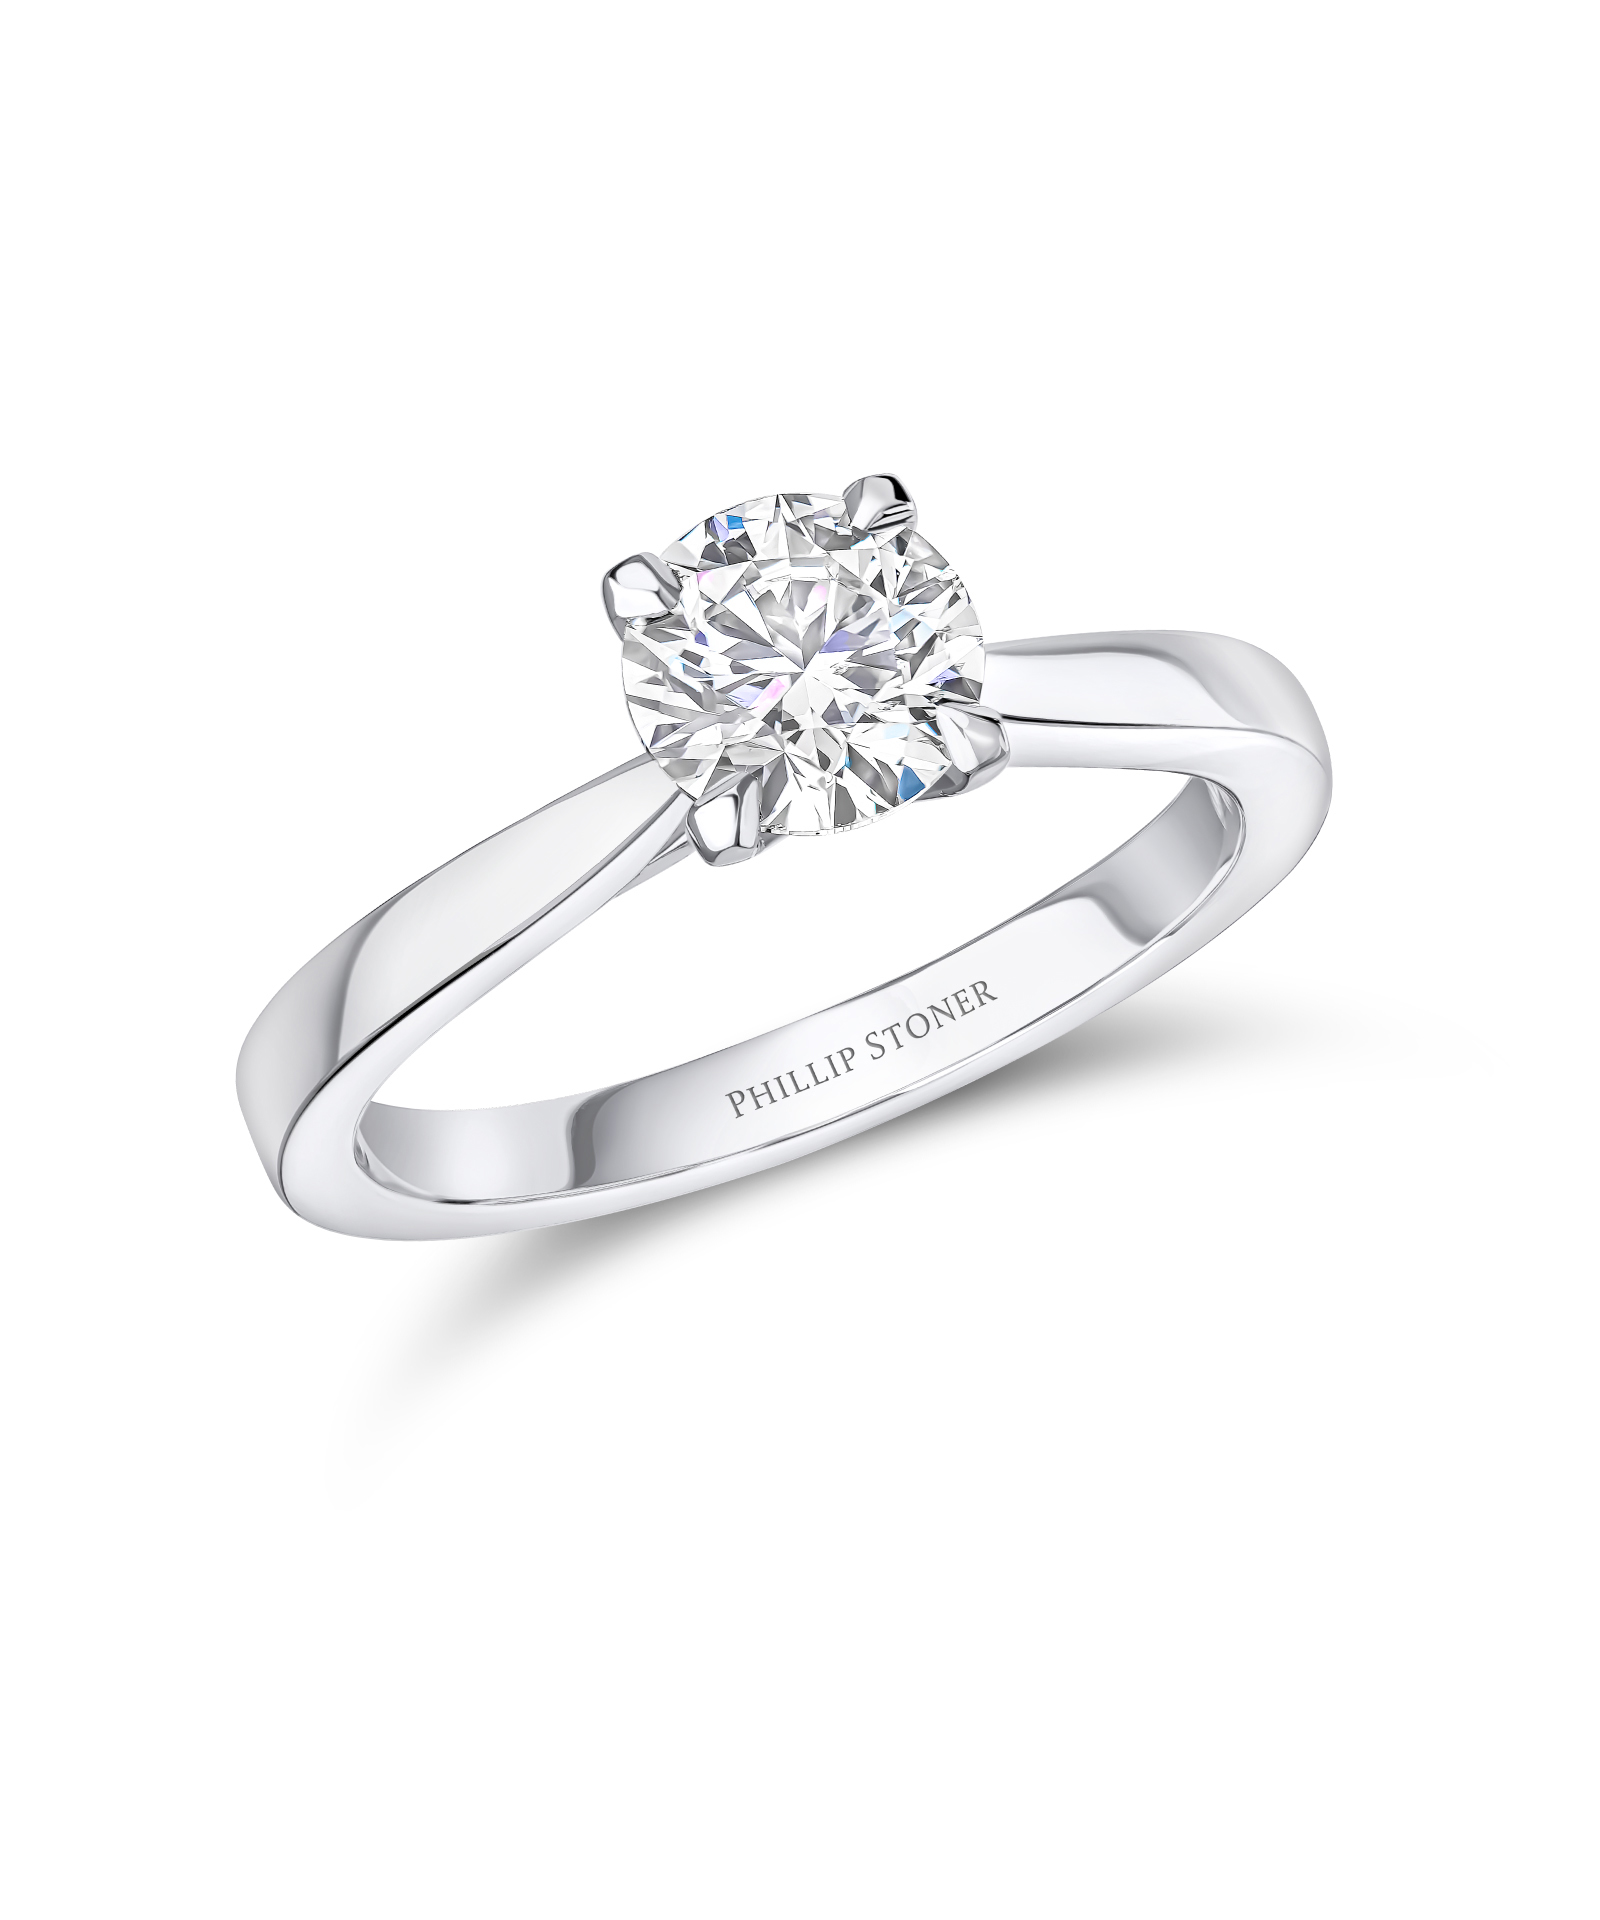 1ct Round Brilliant Cut Diamond Ring with Cathedral Setting - Phillip Stoner The Jeweller